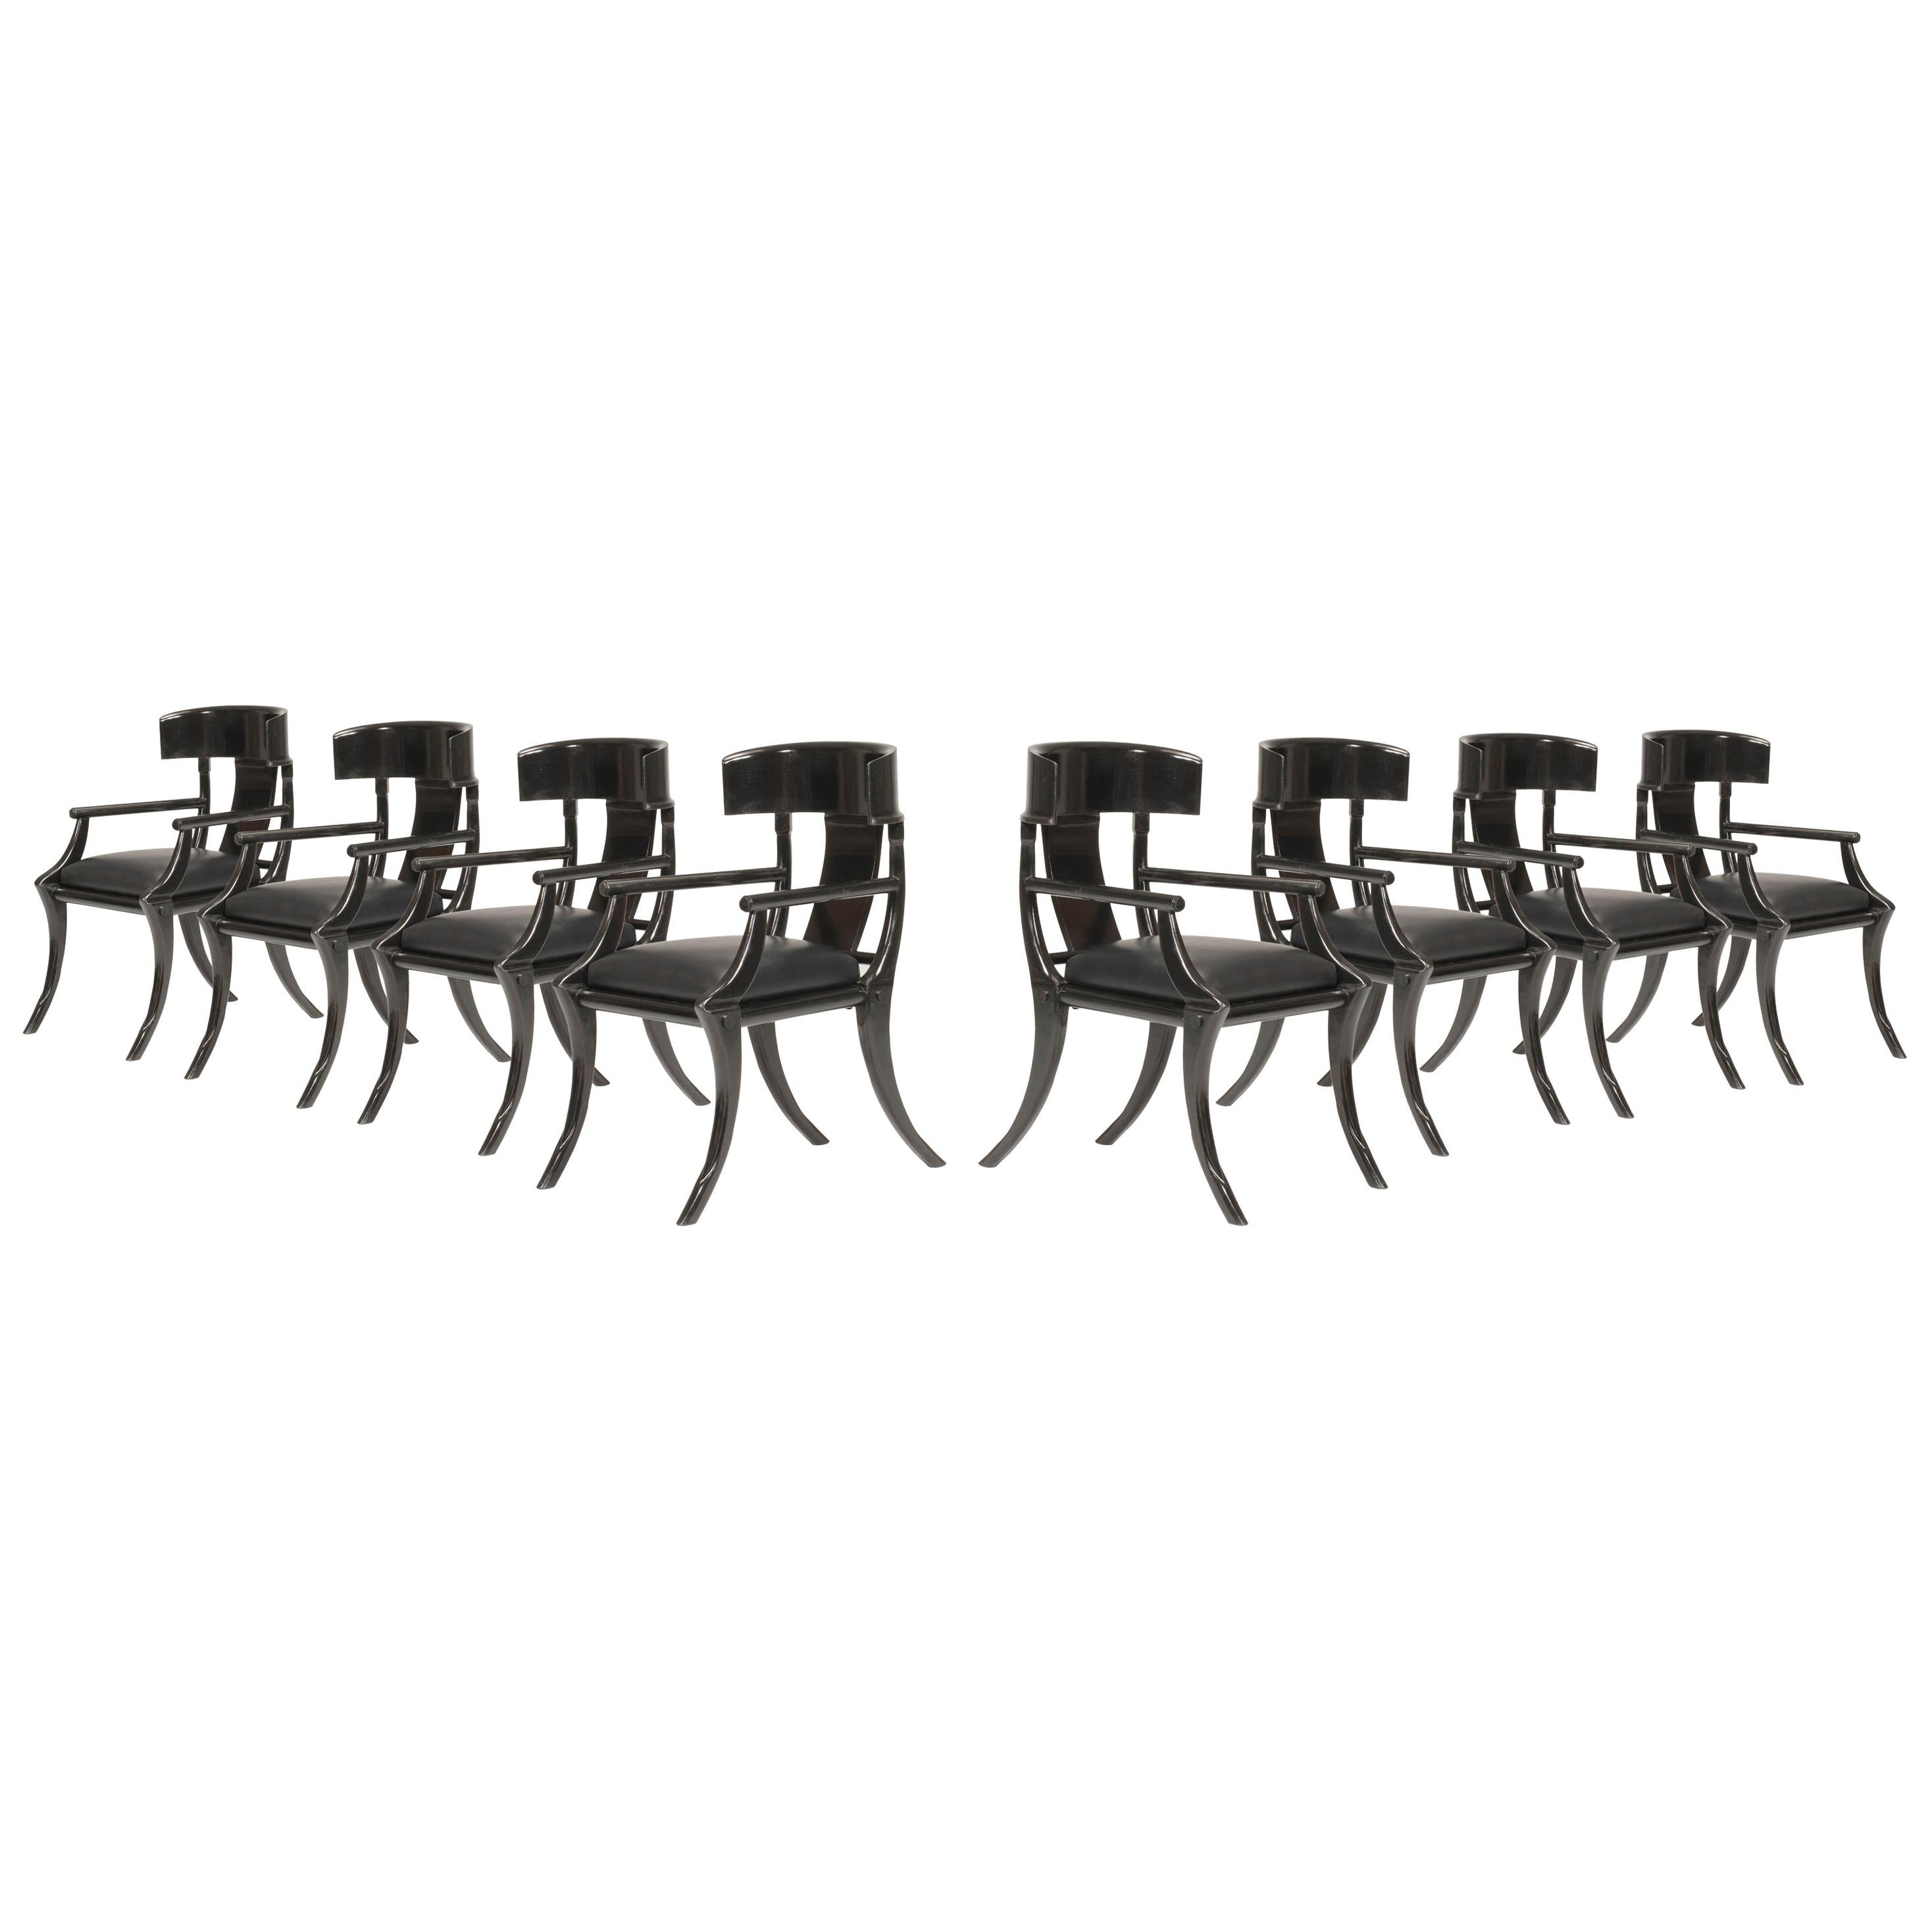 Klismos customizable armchairs with saber legs, black lacquered wood and black plain leather seats. Available in other colors and upholstery.

Walnut wood chairs with deep and large seat and back wraparound feeling backrest. These armchairs are made